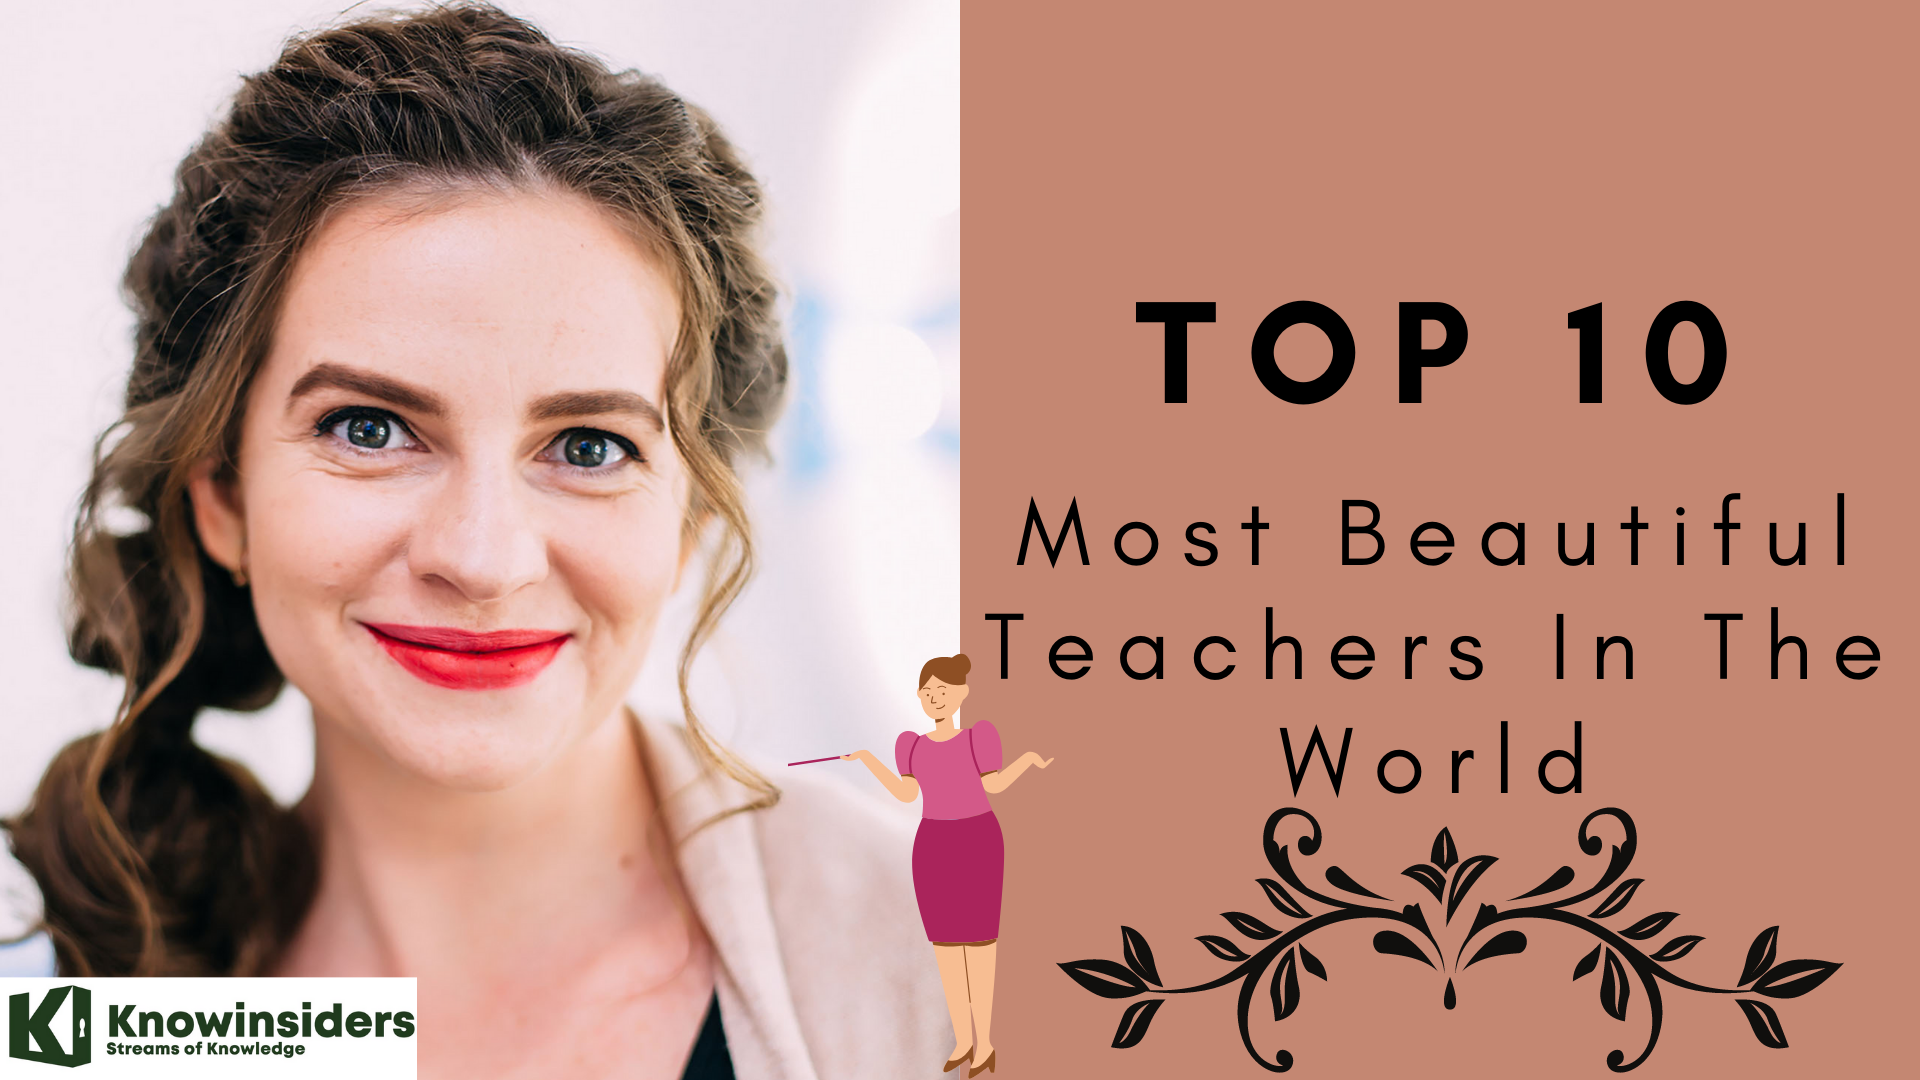 Top 10 Most Attractive Female Teachers In the World Today